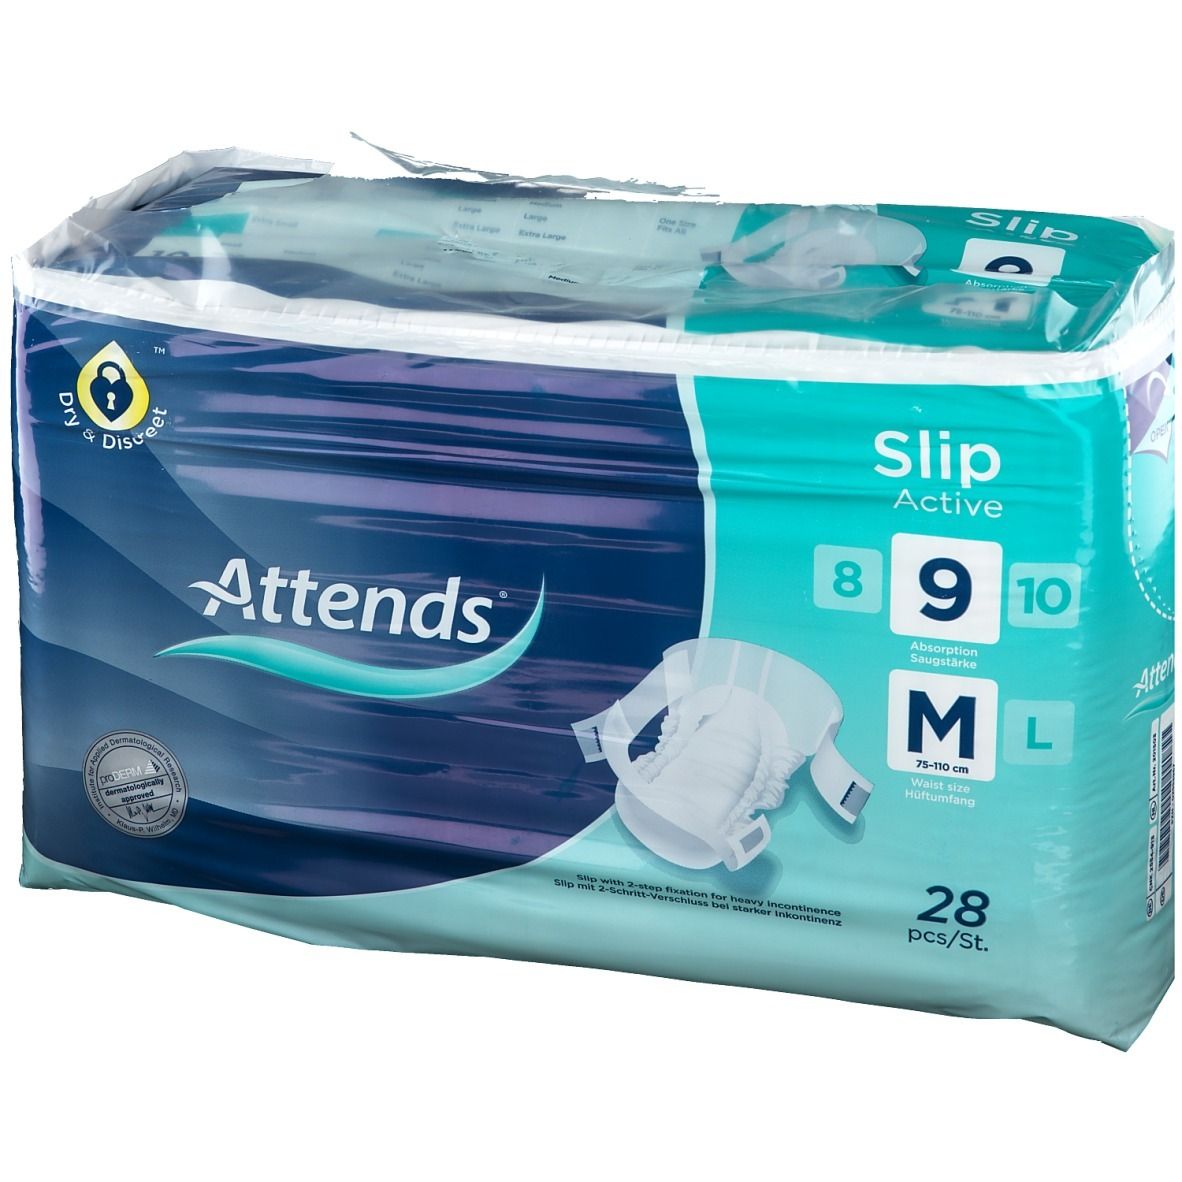 Attends® Slips Active 9 M